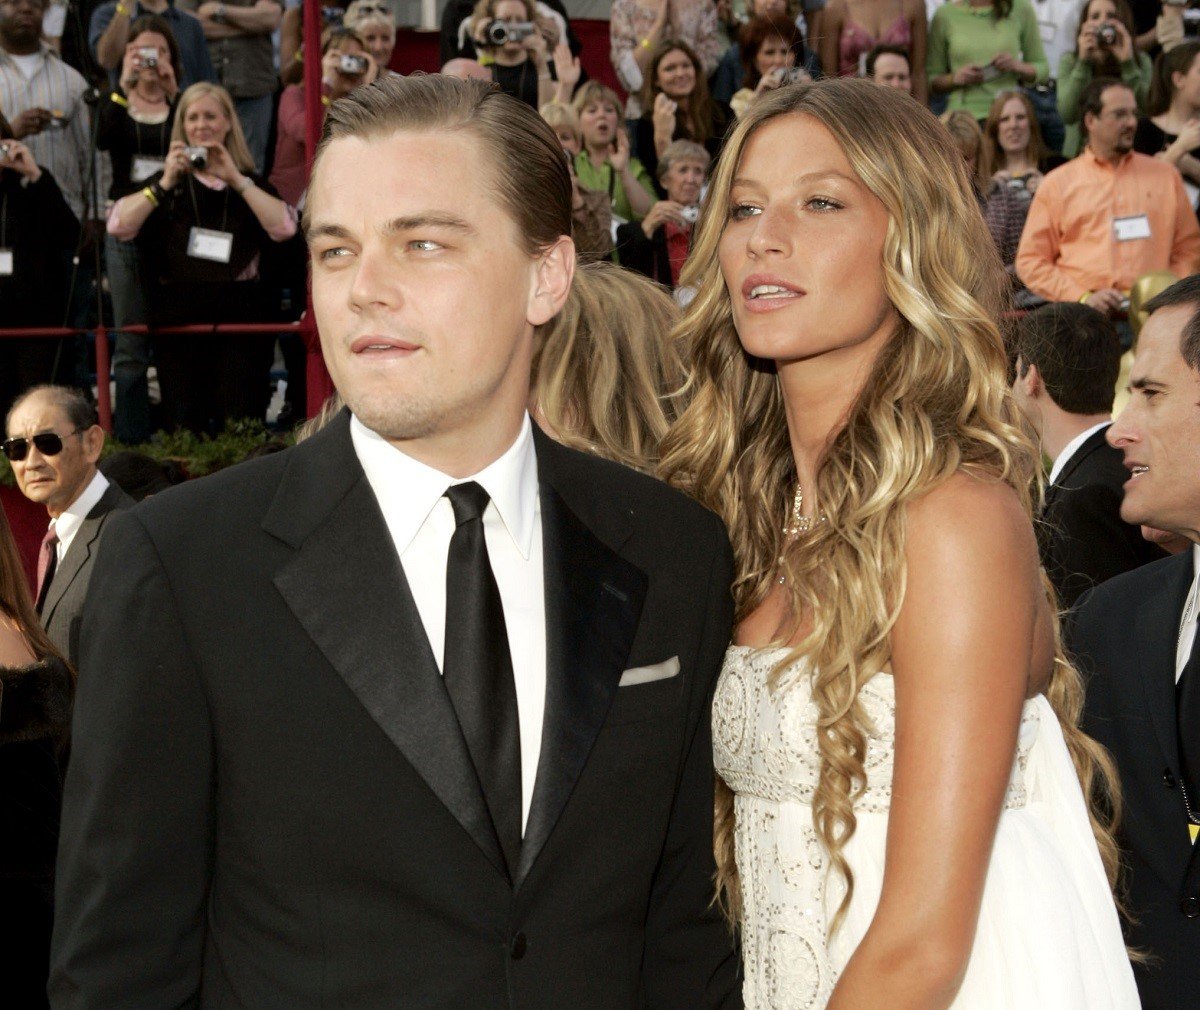 What Is Gisele Bündchen And Leonardo DiCaprio Net Worth? Who Has A Higher Net Worth?